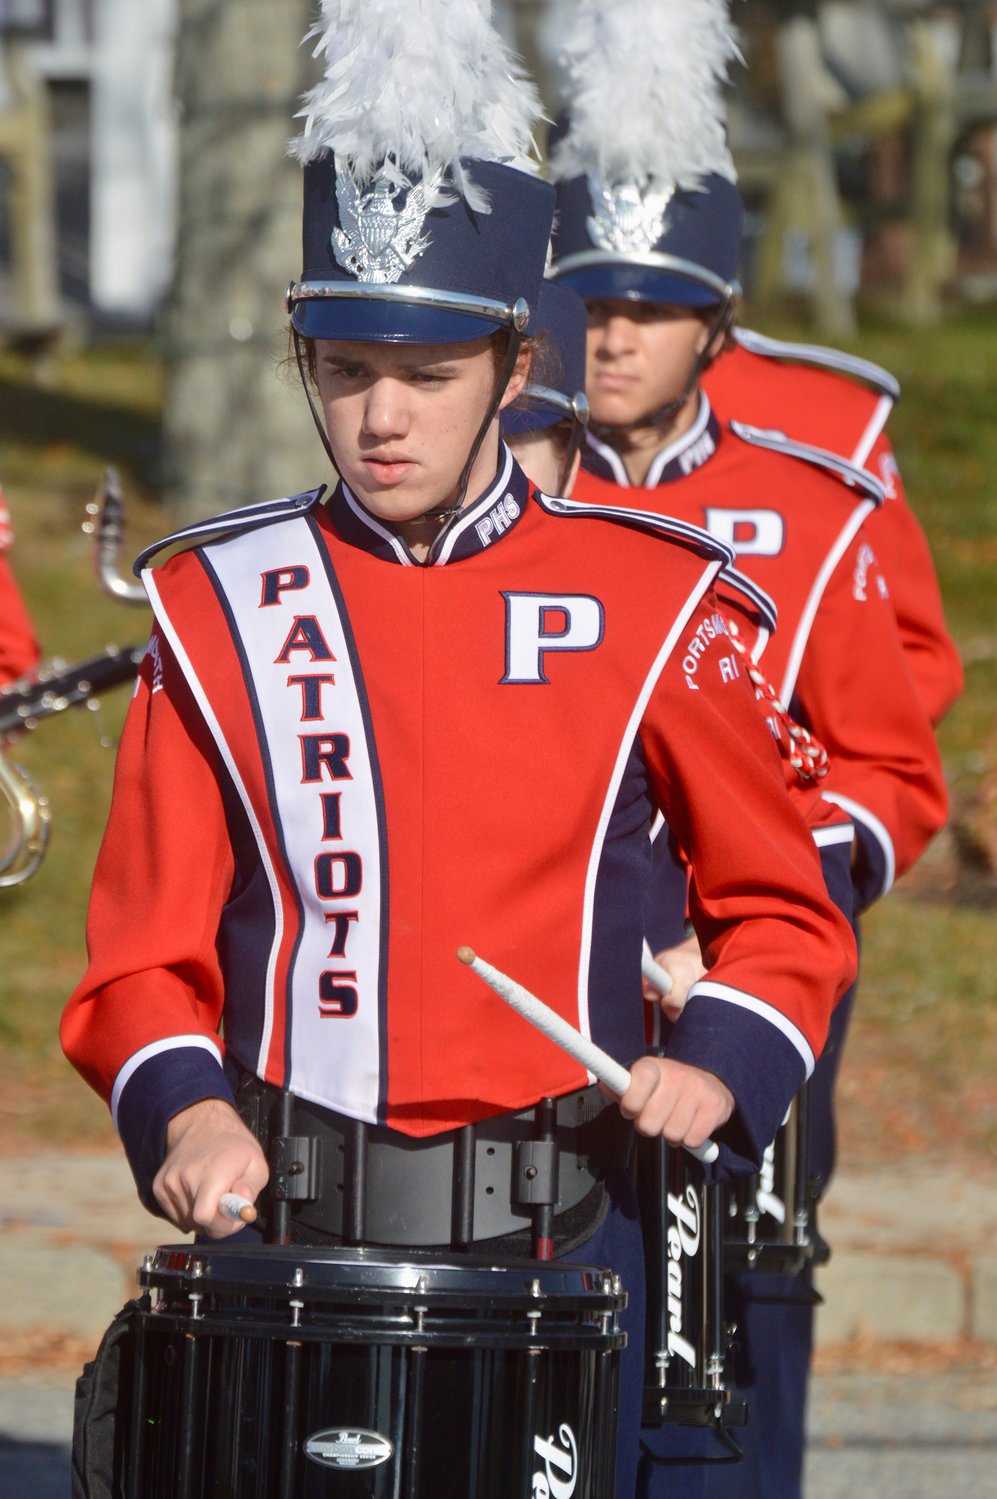 Members of the PHS Marching Band warm up near Stone Bridge before the short Veterans Day parade.